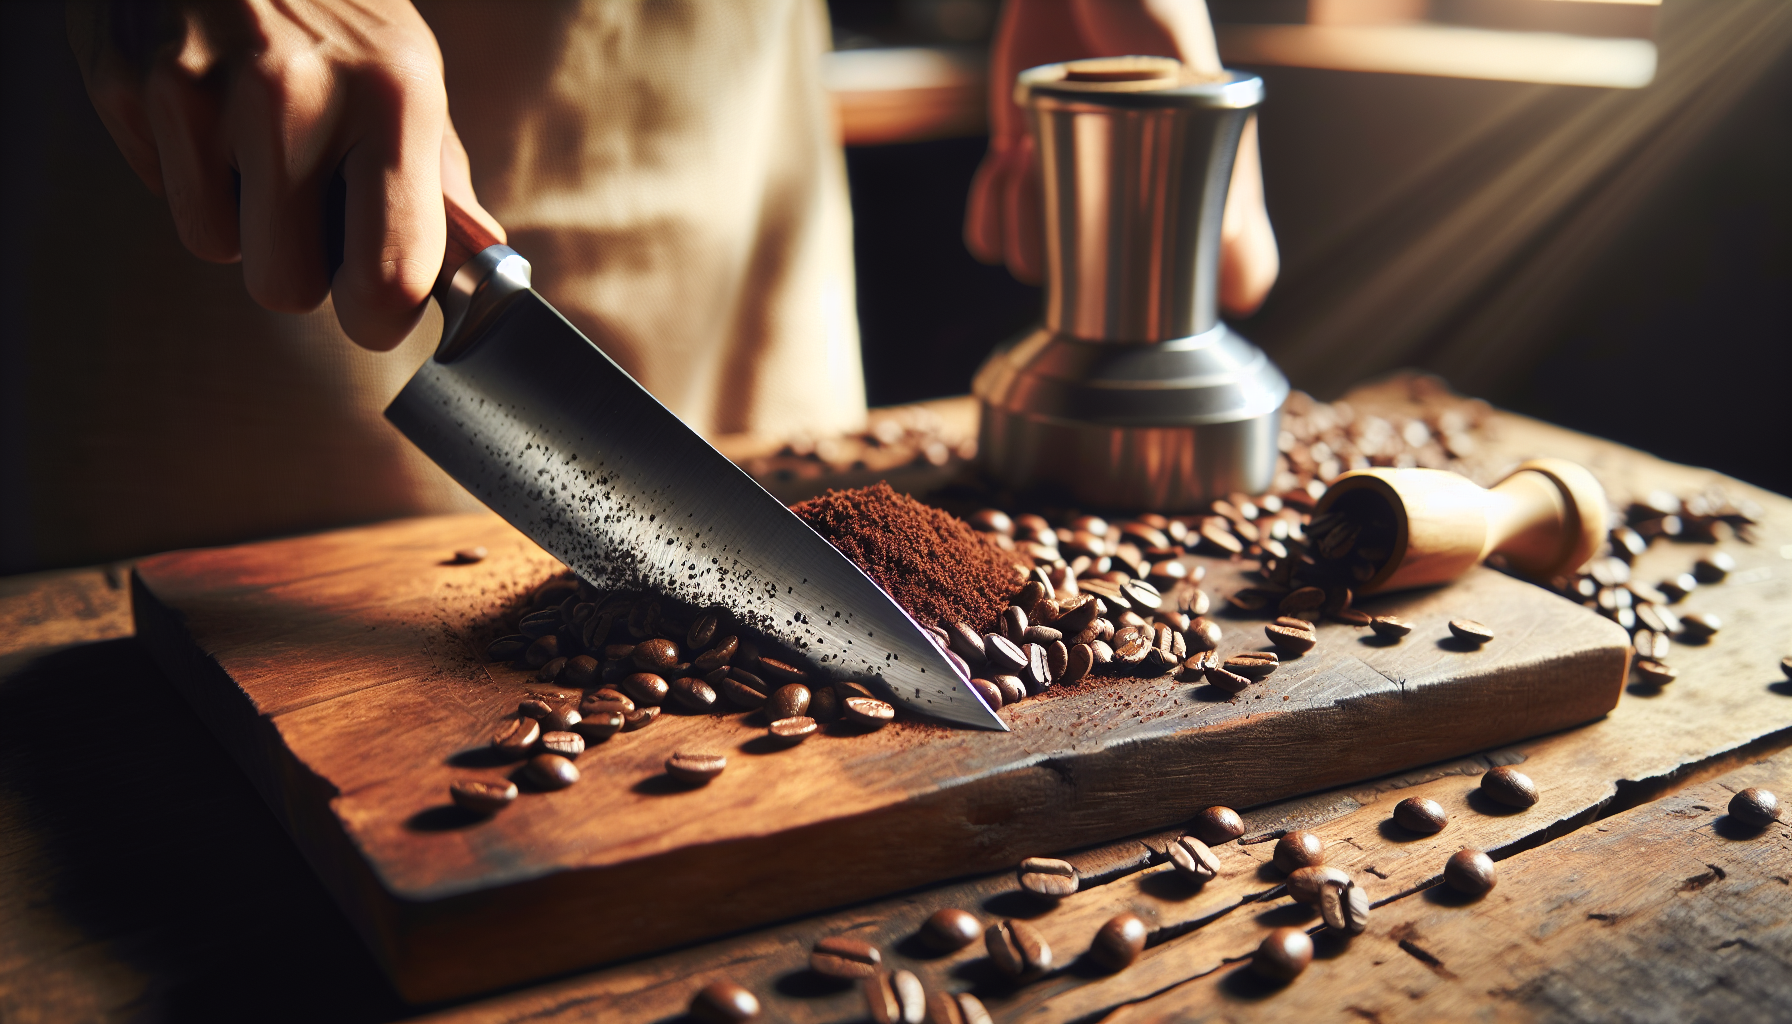 Knife and coffee beans